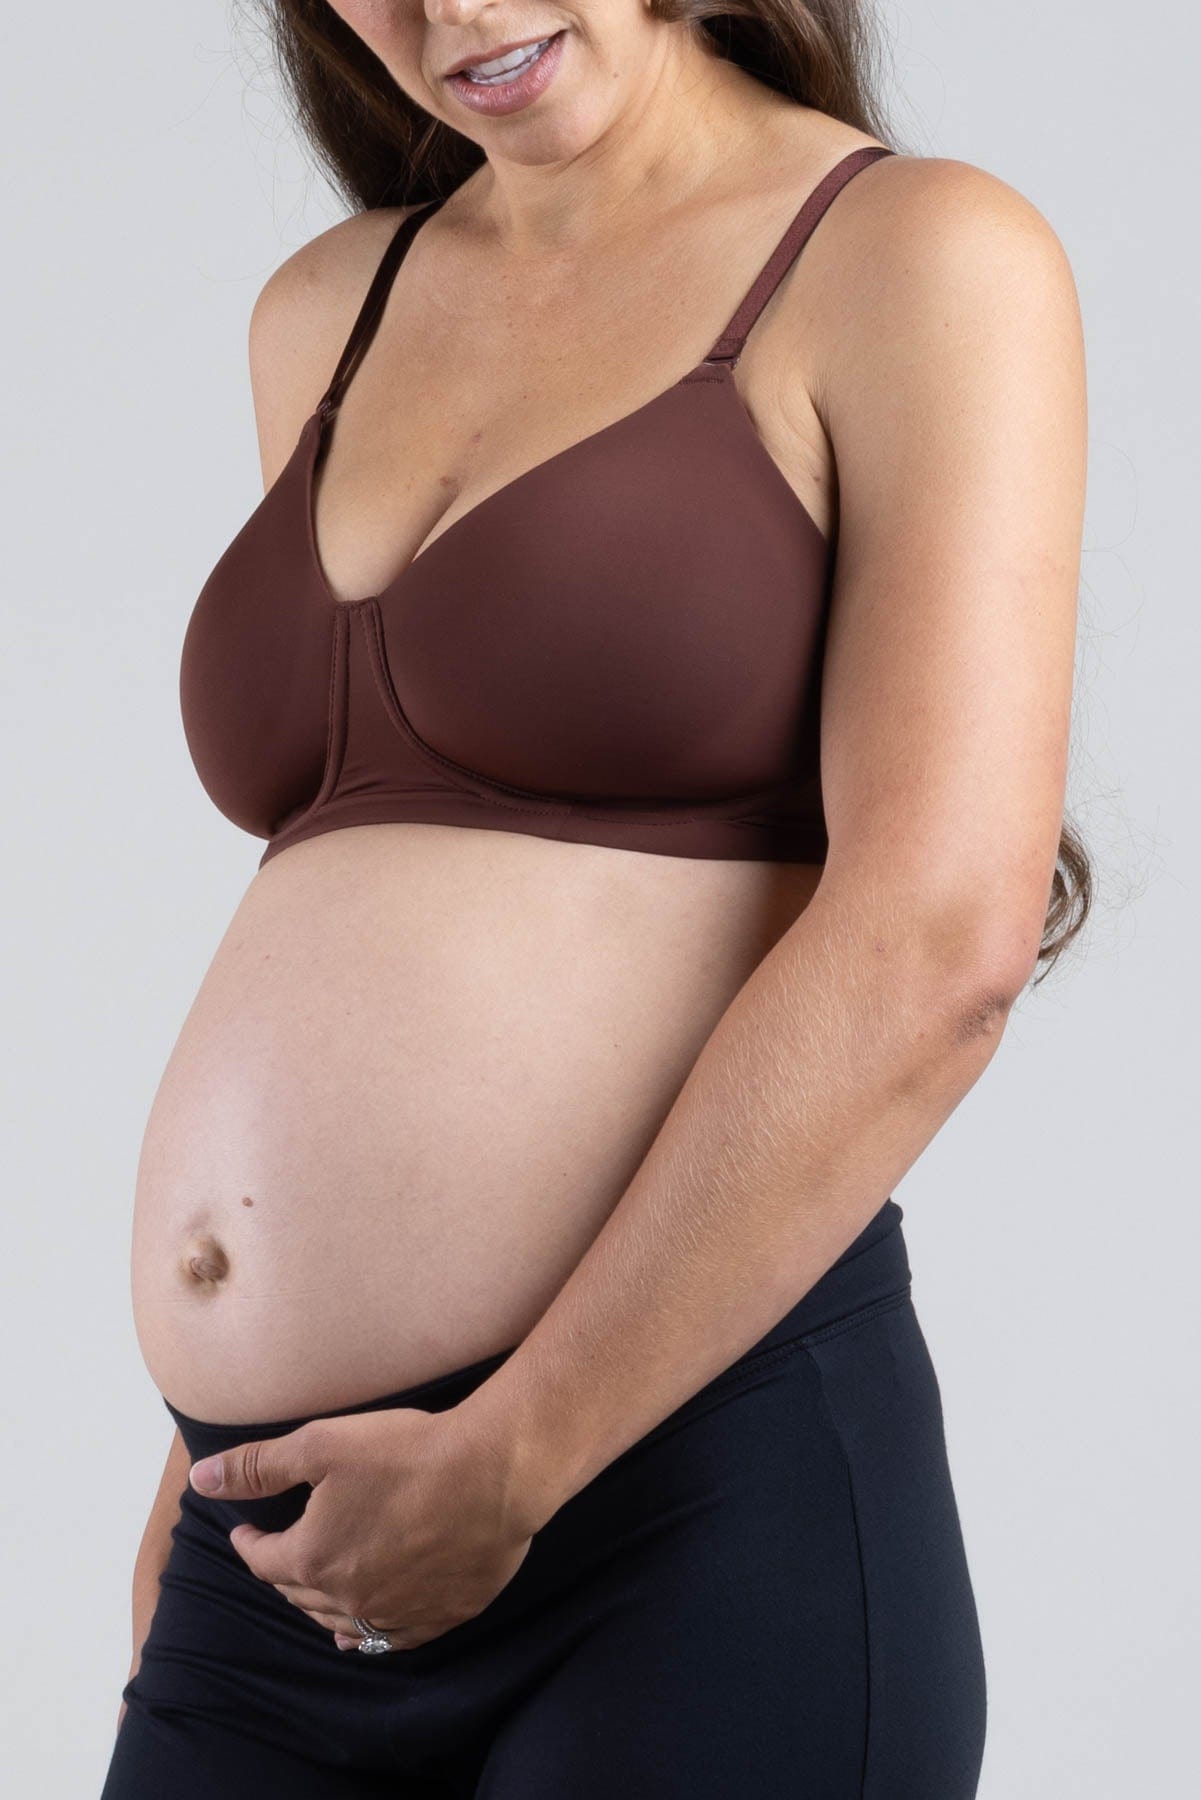 I was given a maternity bra on my first job because of my boobs